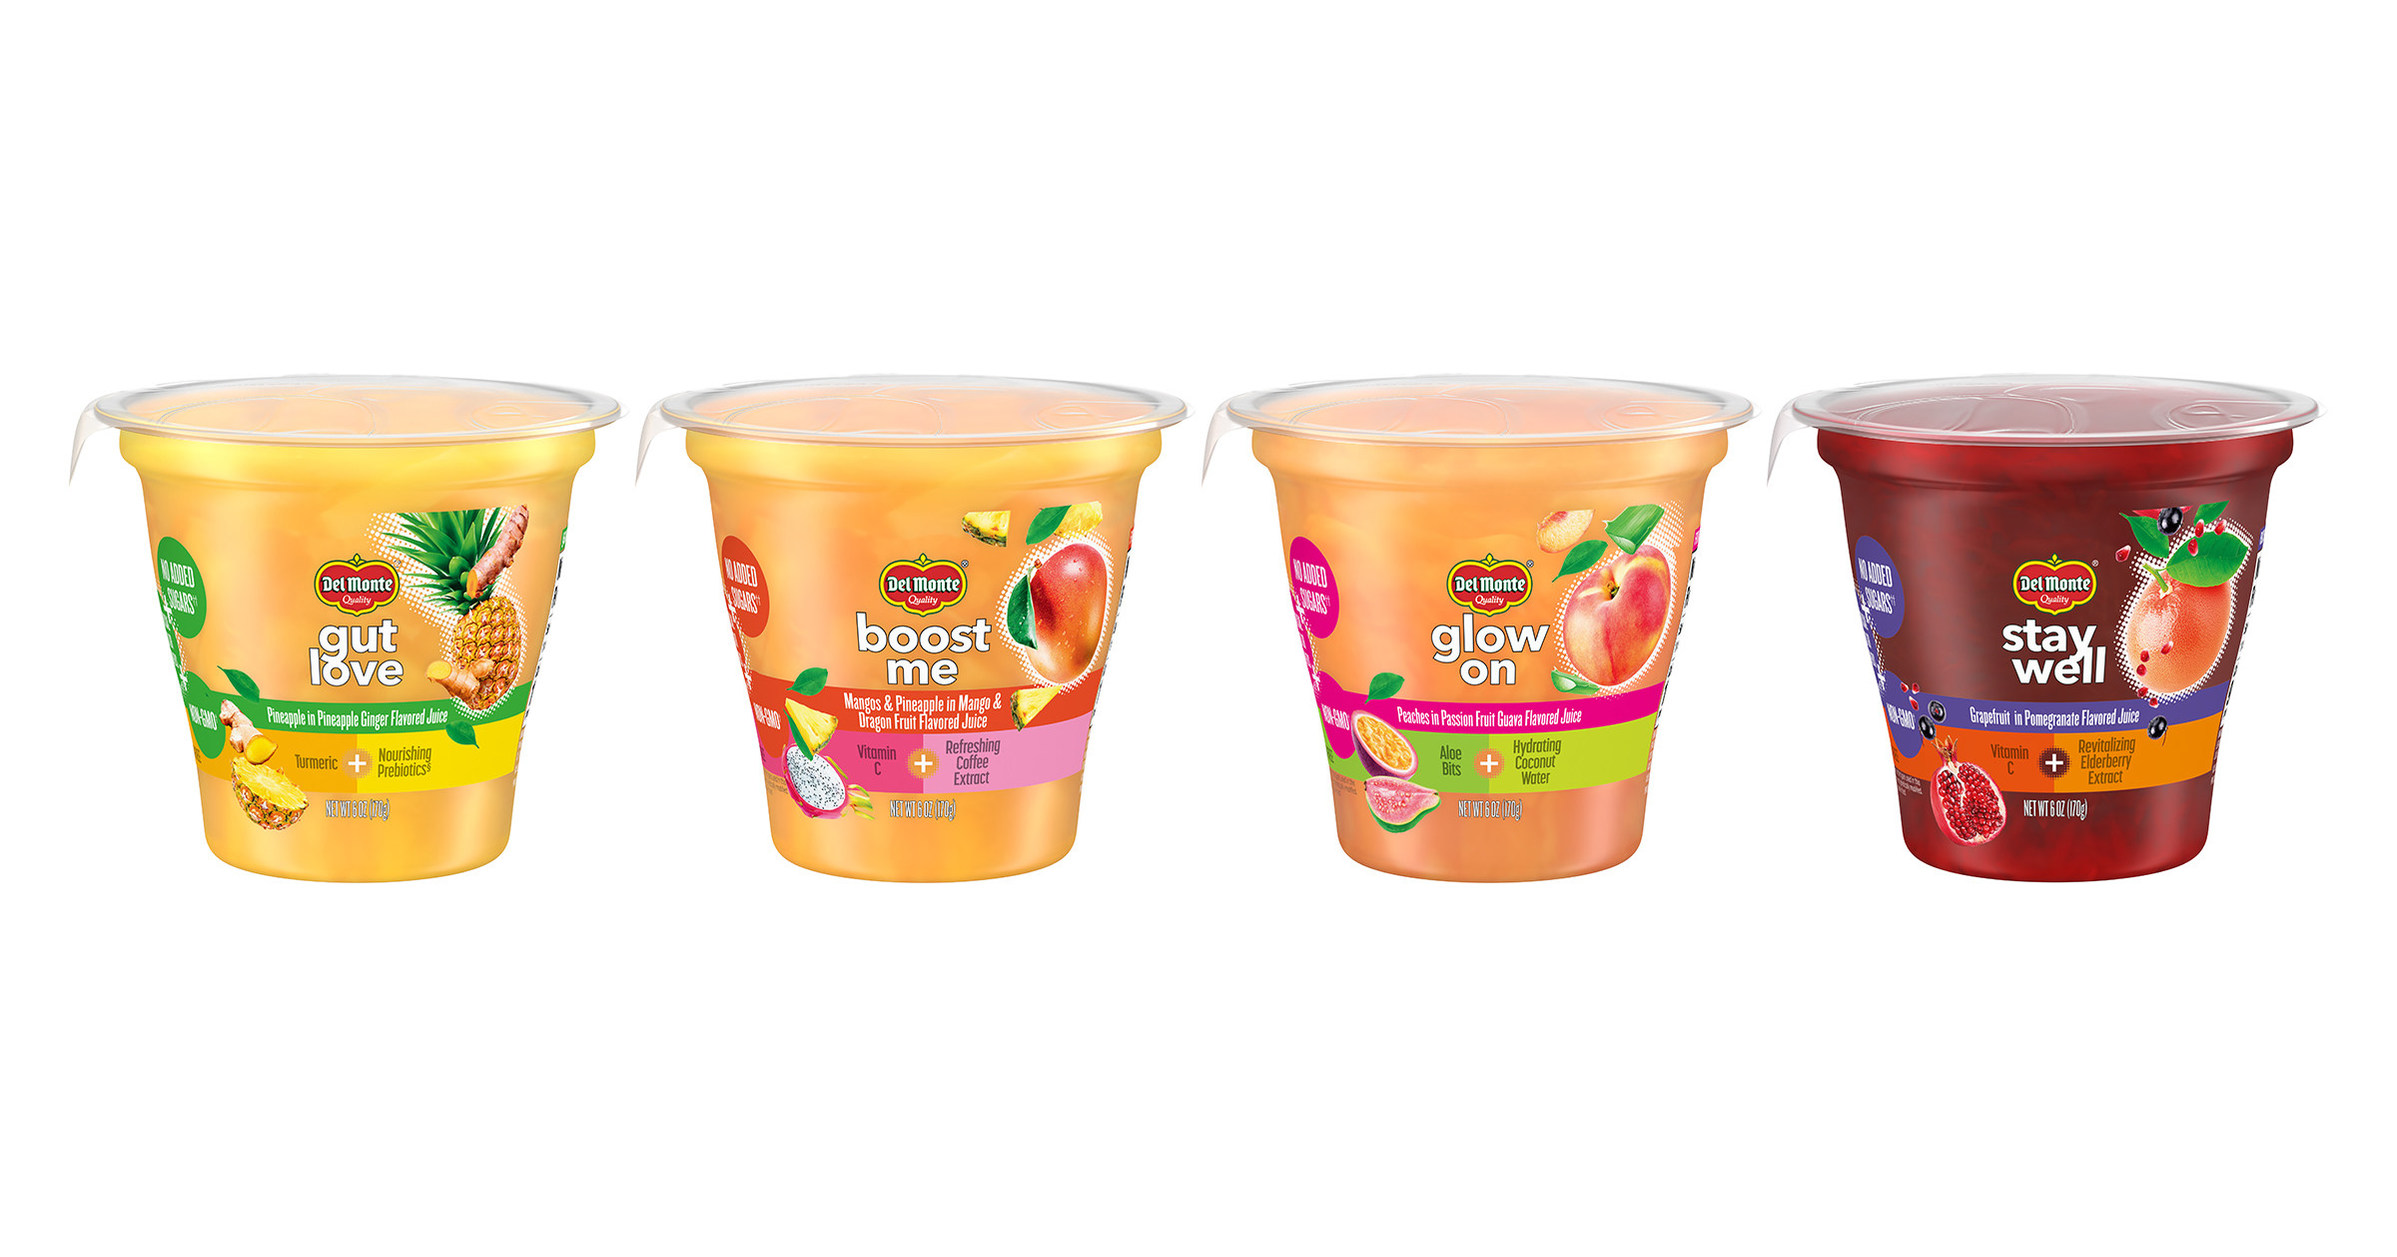 A Fruit Cup with Added Benefits, Introducing New Del Monte® Fruit